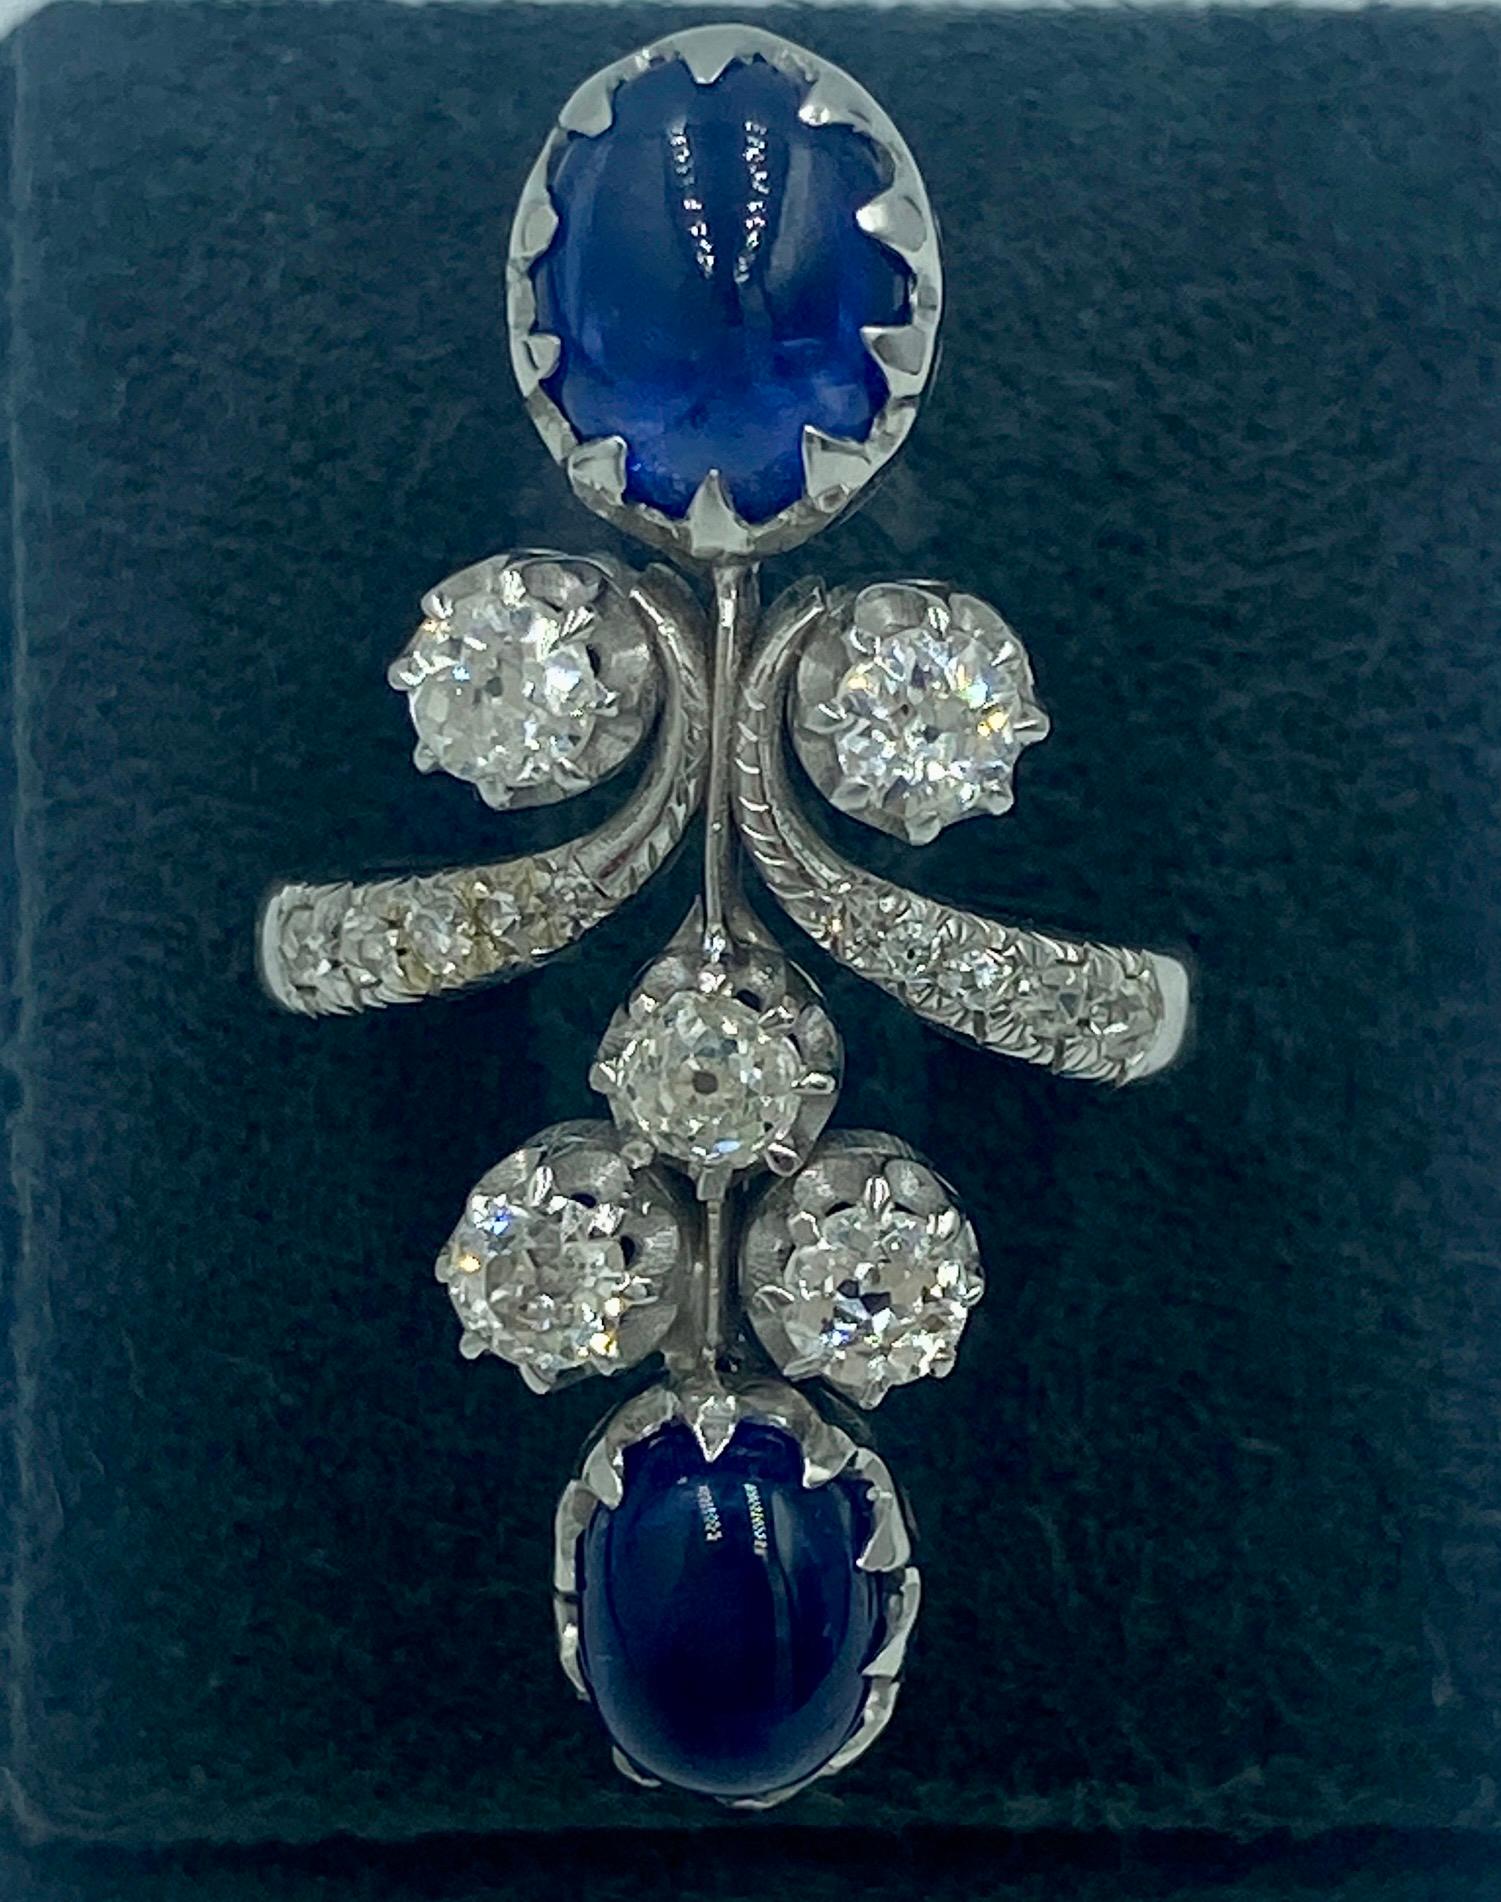 This 1950s ring is made in France and features 2 cabochon sapphires totalling approximately 5 carats and old European cut diamonds weighing approximately 1 carat.